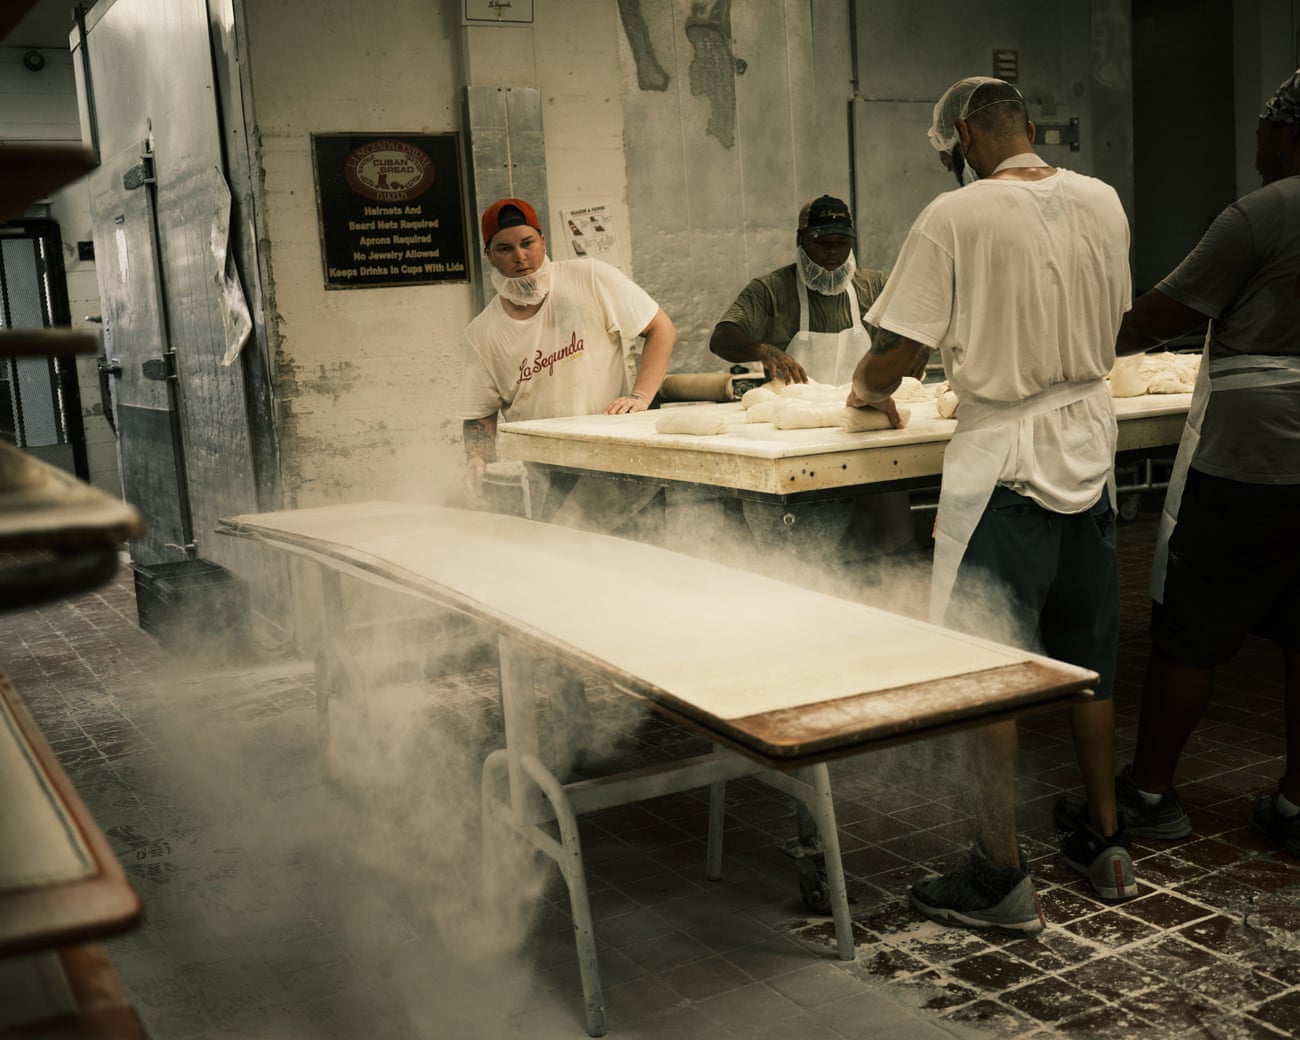 A man throws flour onto a long wooden table while two others stand at another table handling dough in the kitchen of a commercial bakery.